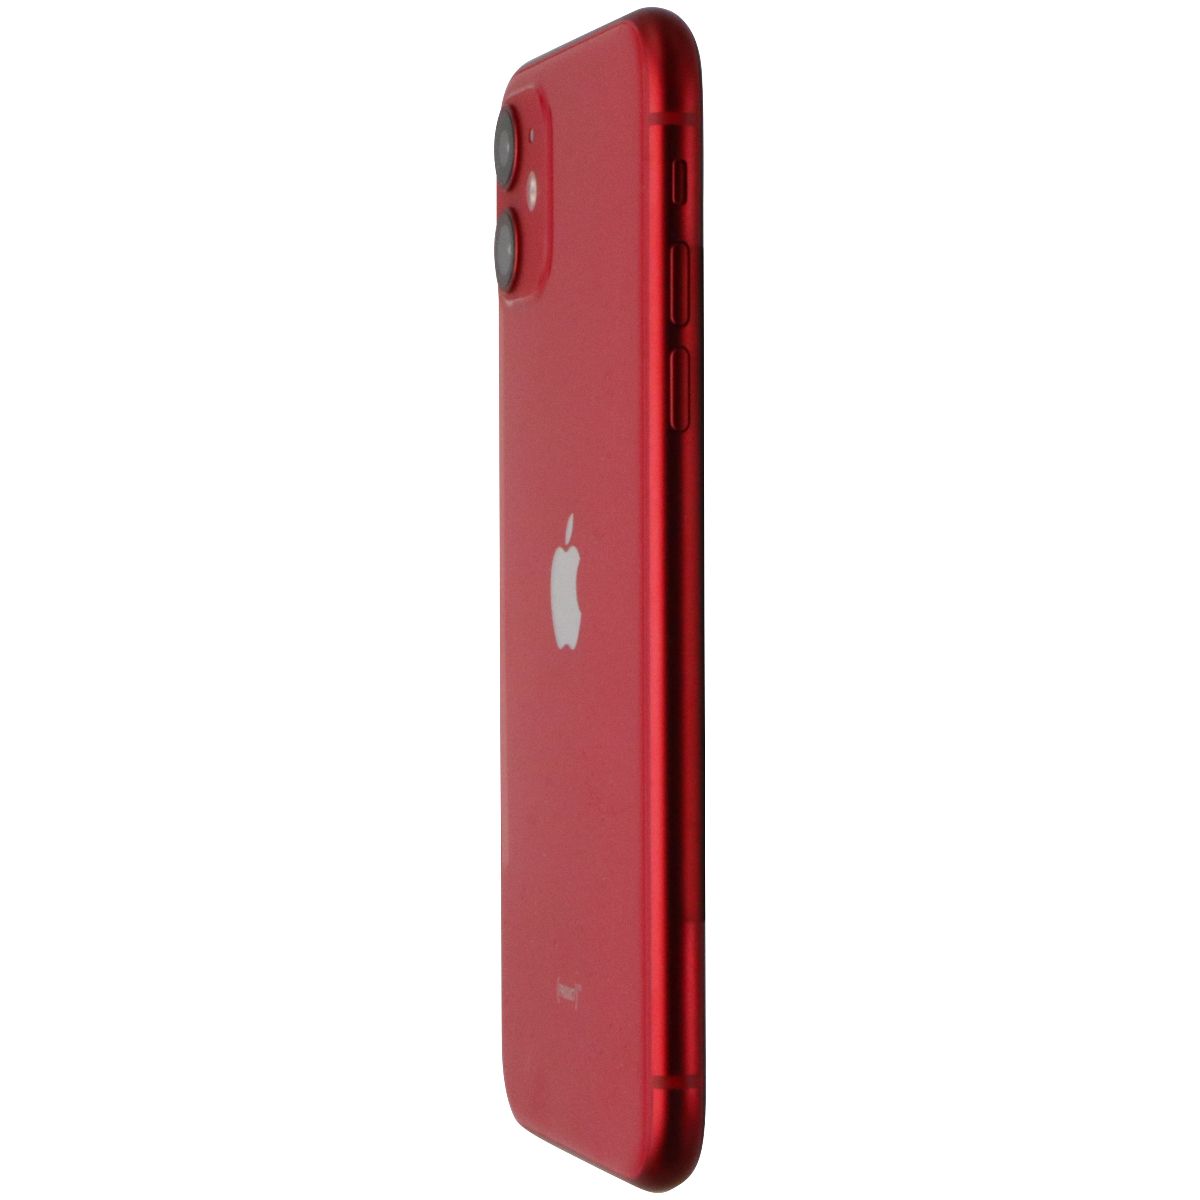 Apple iPhone 11 (6.1-inch) Smartphone (A2111) Dish Boost ONLY - 64GB / Red Cell Phones & Smartphones Apple    - Simple Cell Bulk Wholesale Pricing - USA Seller